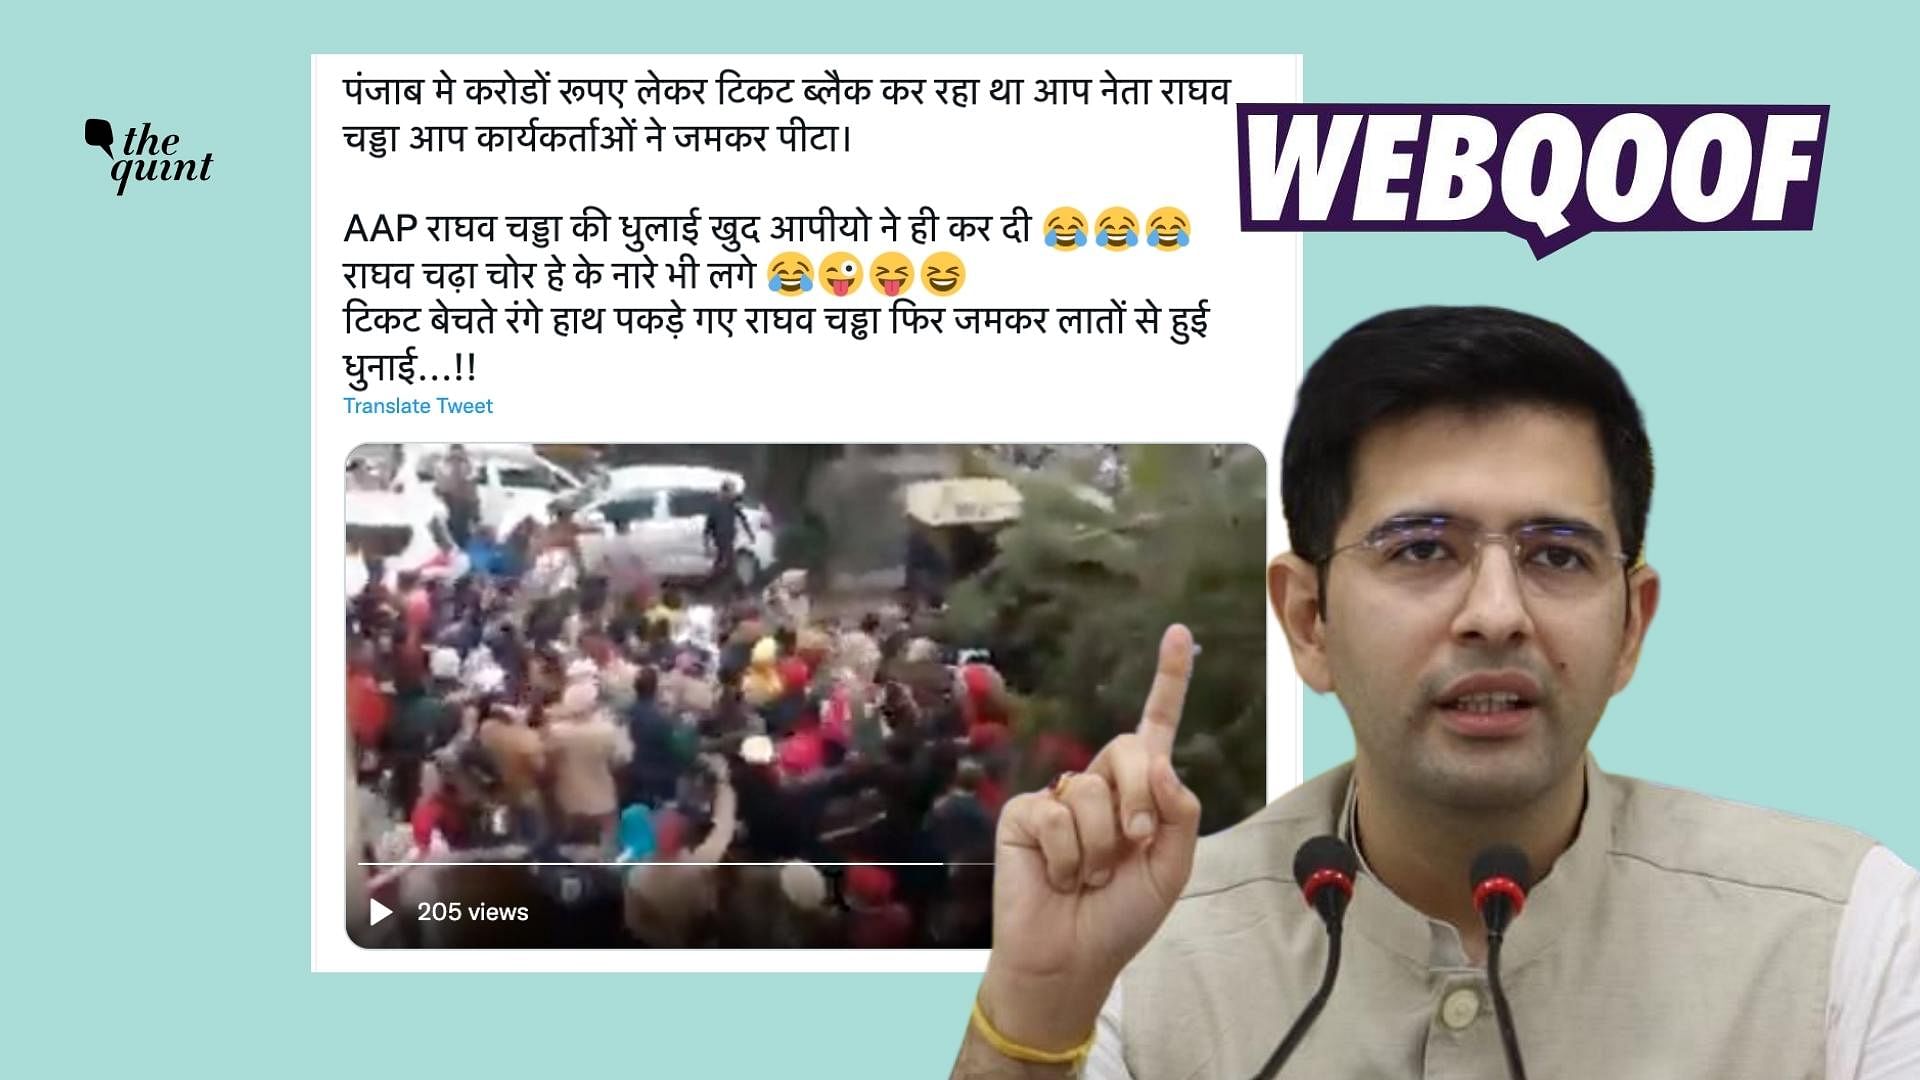 <div class="paragraphs"><p>The claim states that AAP leader Raghav Chadha was beaten up by party workers in Punjab.&nbsp;</p></div>